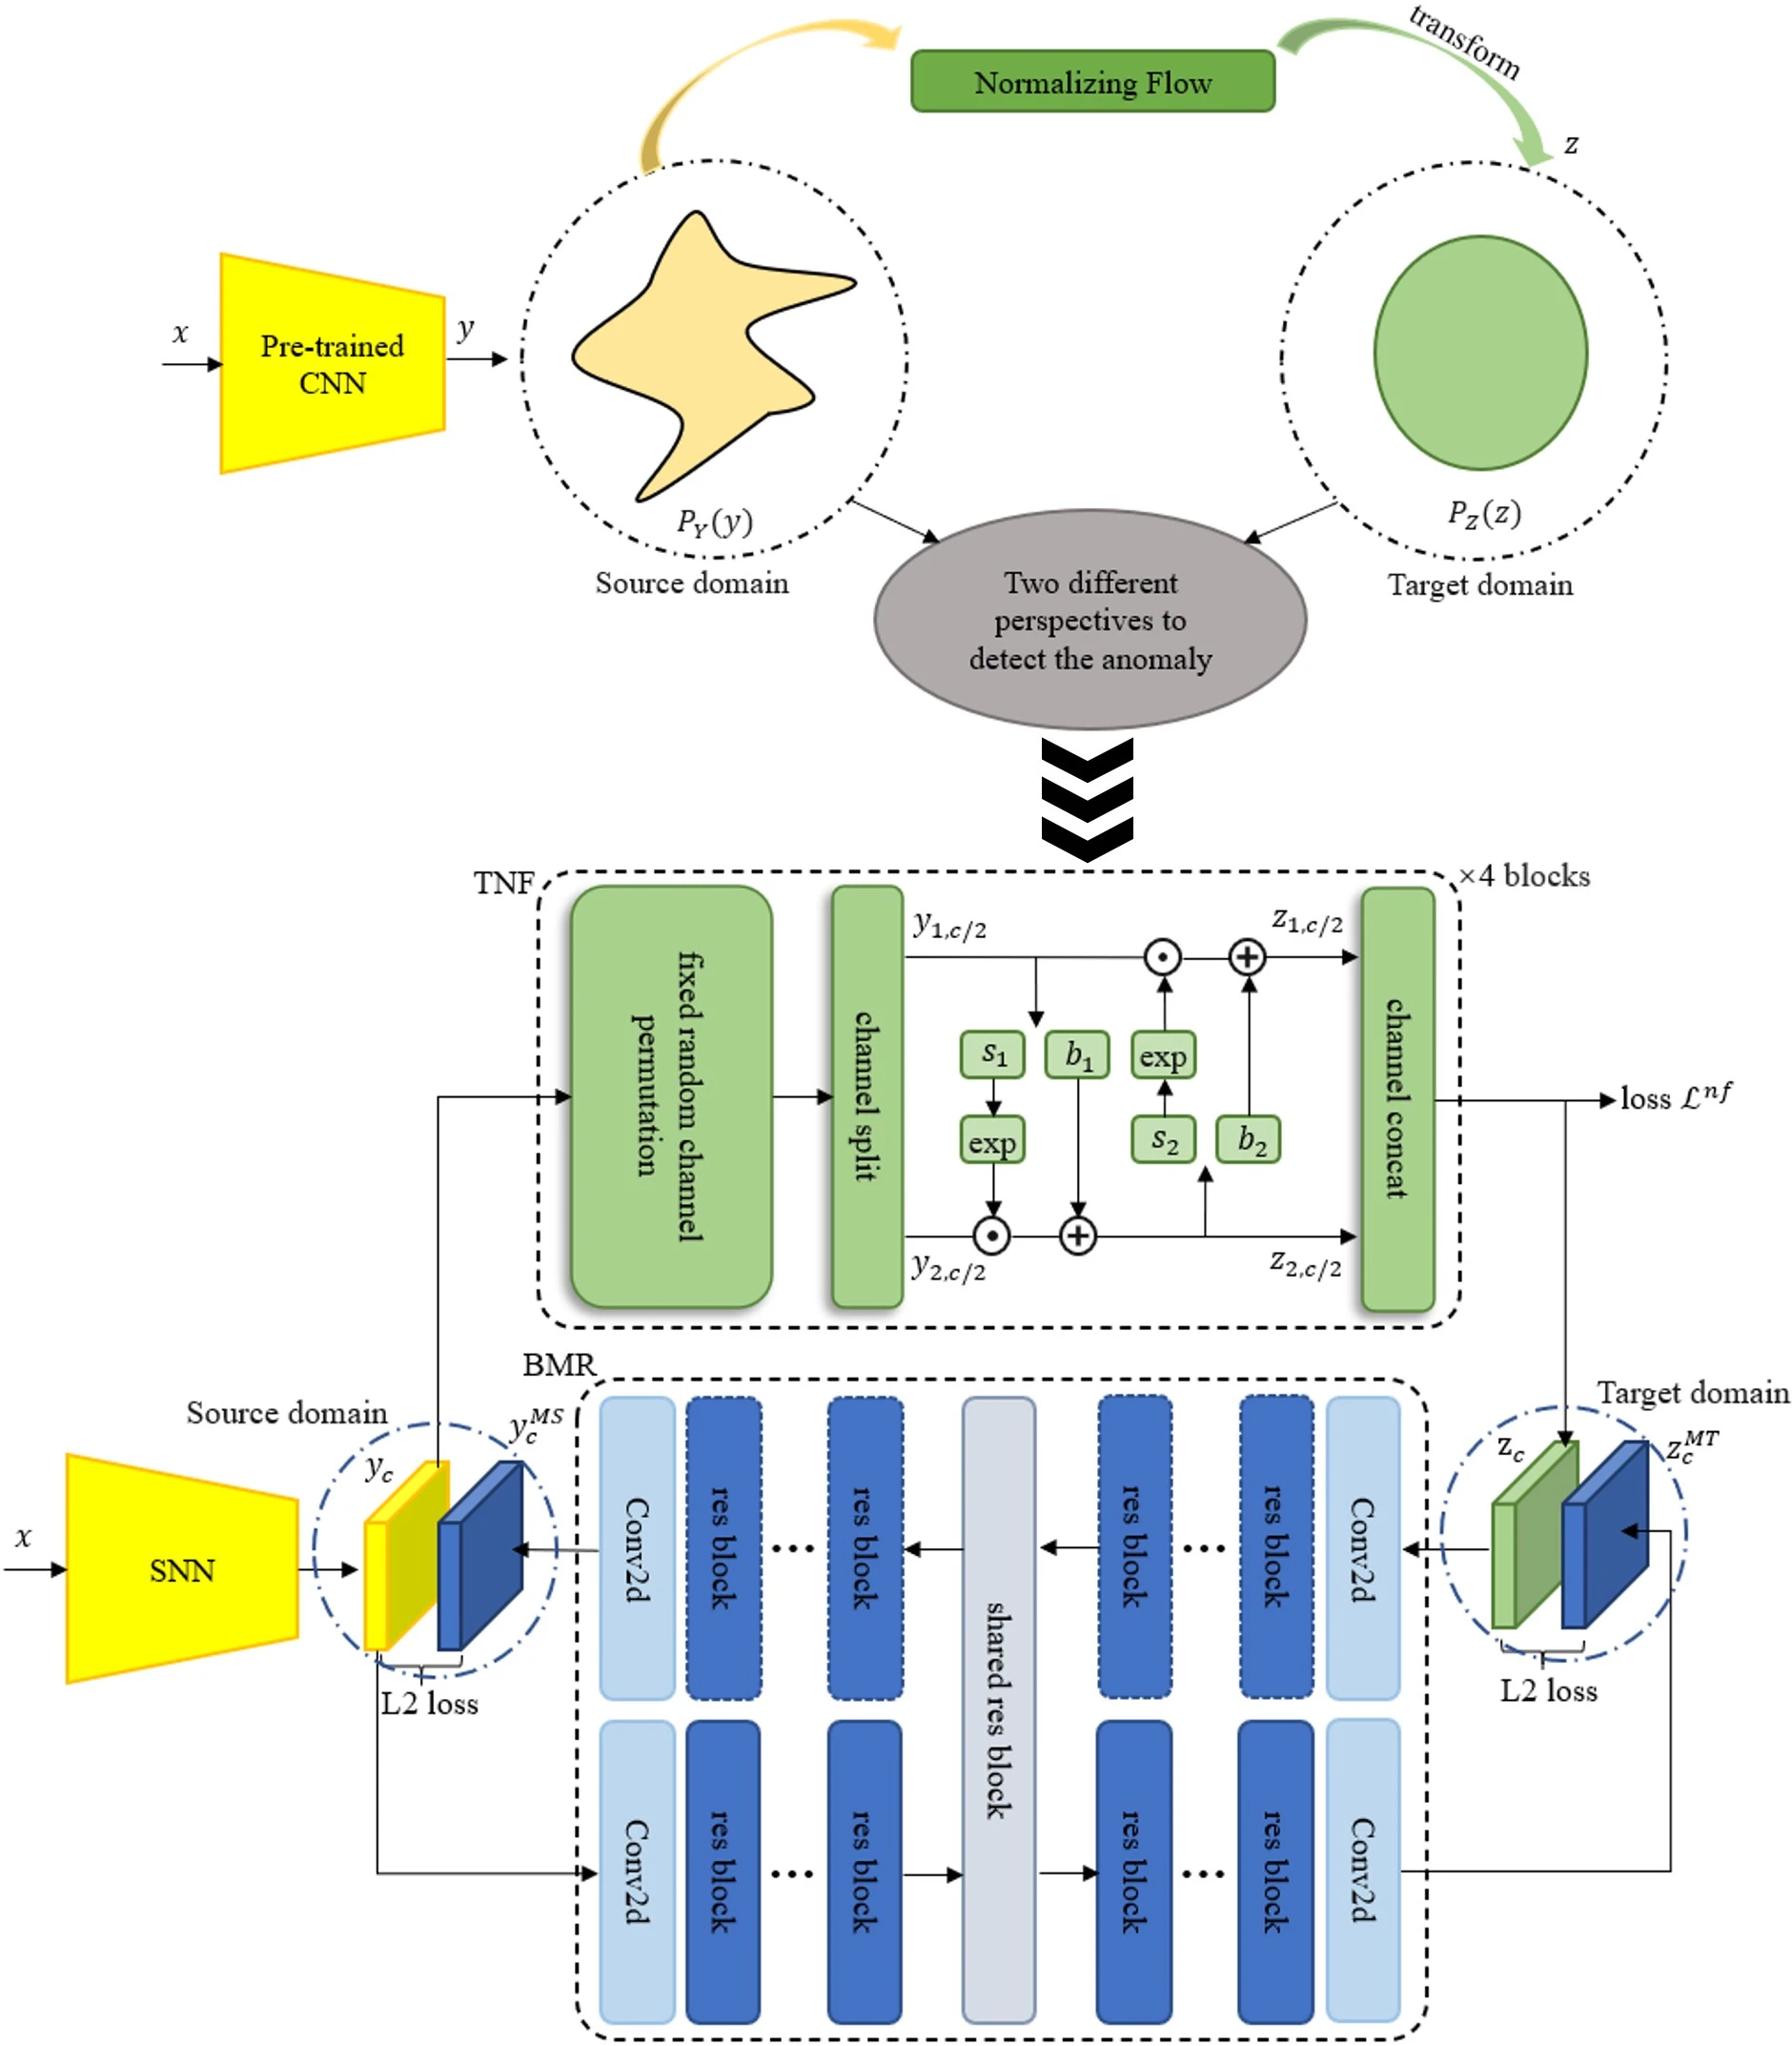 A Normalizing Flow-Based Bidirectional Mapping Residual Network for Unsupervised Defect Detection